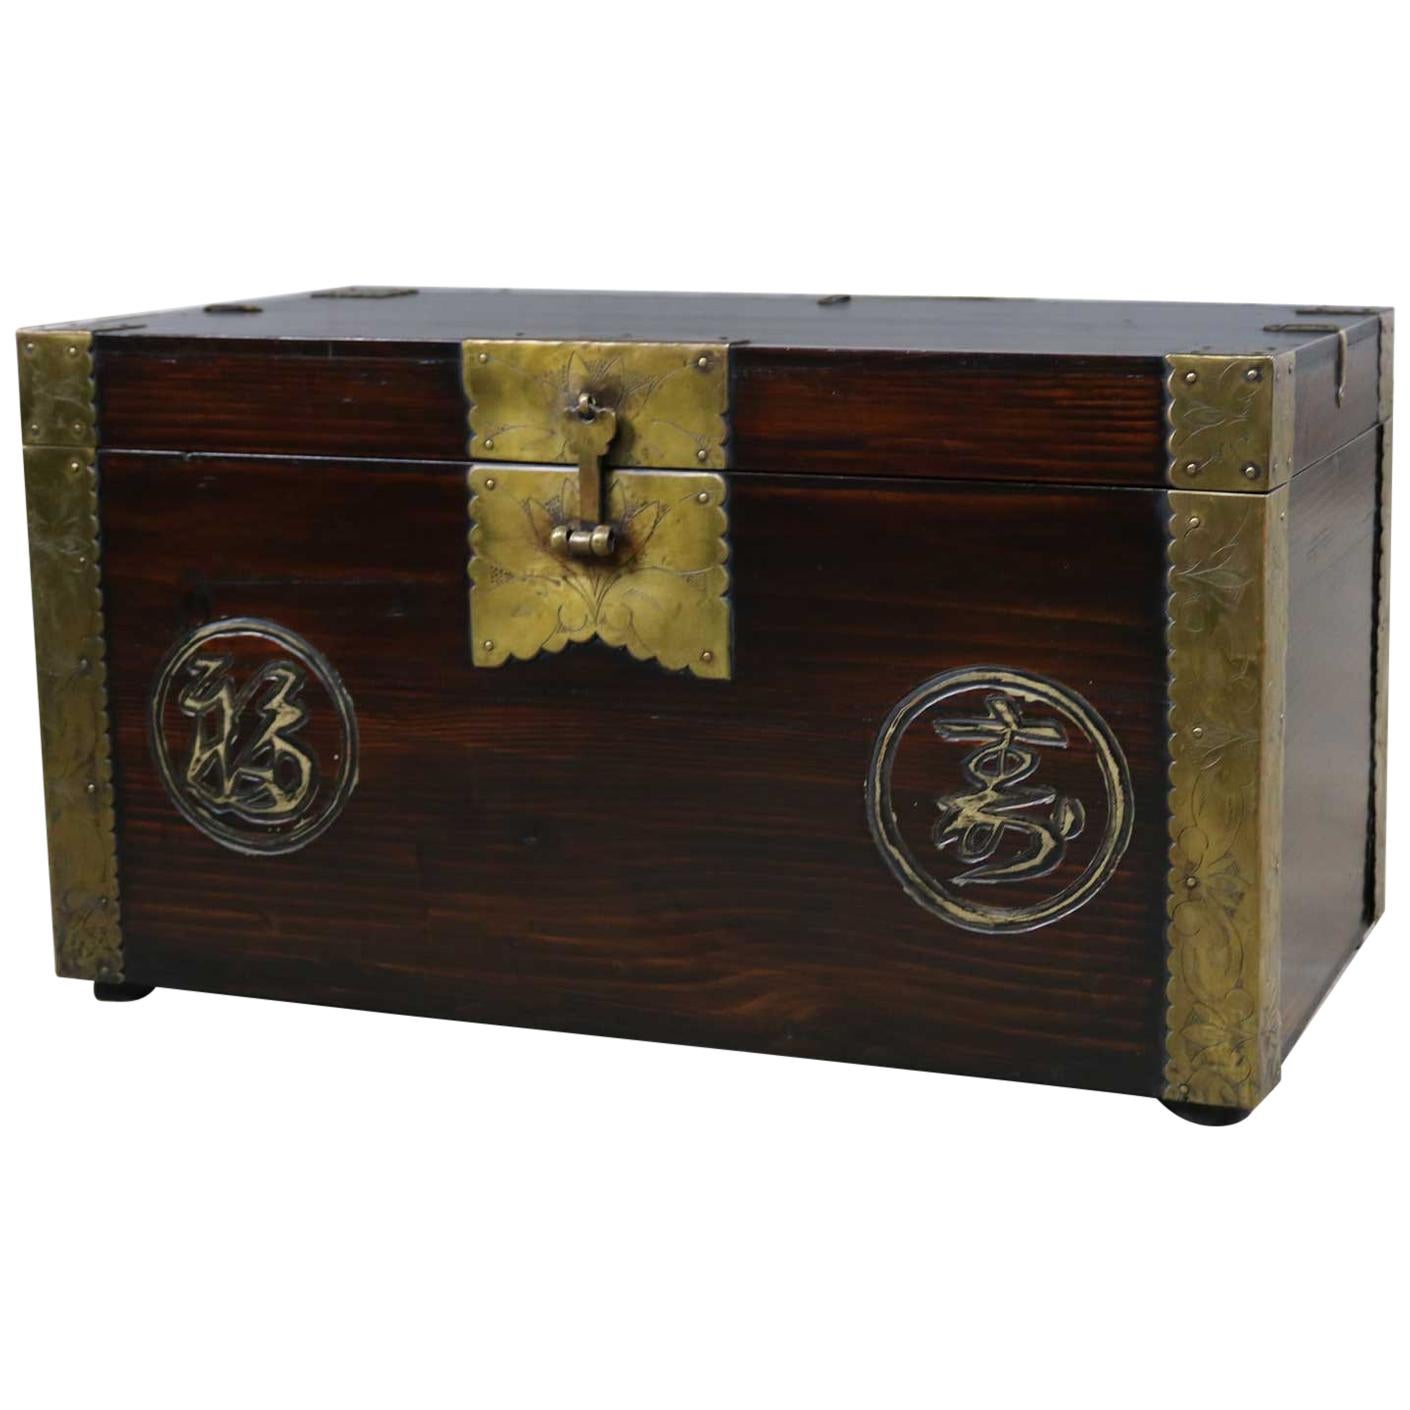 Antique Korean Trunk Chest or Box circa 1920s with Luck and Longevity Characters For Sale